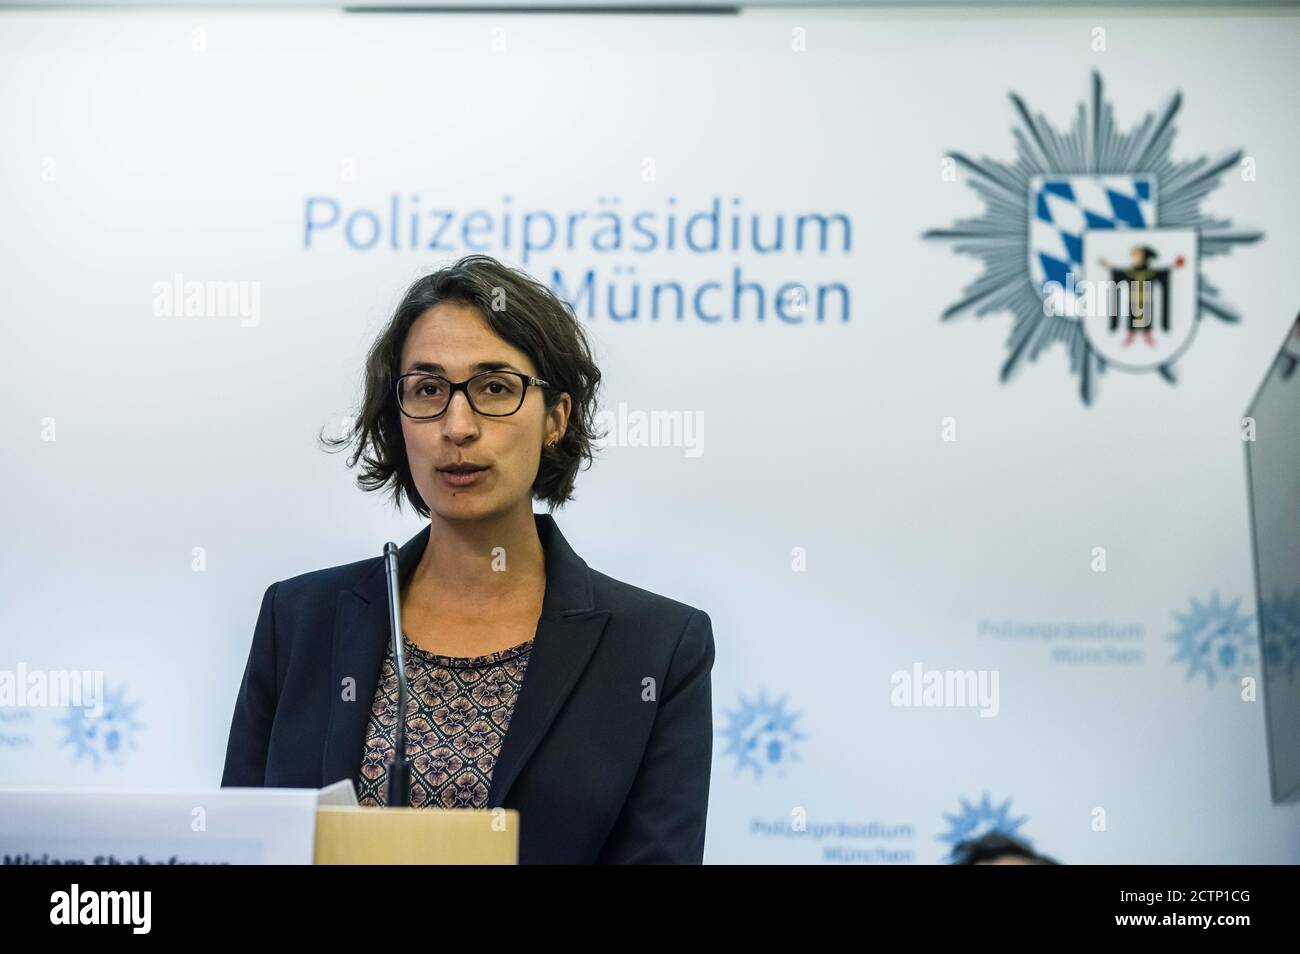 Munich, Bavaria, Germany. 24th Sep, 2020. Dr. MIRIAM SHABAFROUZ of the Bundeszentrale politischer Bildung. Bavarian Interior Minister Joachim Herrmann introduced the new bookÂ ''Islamischer Staat: Geschlagen, nicht besiegt'' (''Islamic State: Beaten, but Not Defeated'') by Dr. Daniel Holz andÂ terrorism expert Rolf Tophoven at the PolizeipraesidiumÂ Munich.Â The trio engaged in aÂ discussion of the Islamic State (IS, ISIS) in an overview, how IS' methodology has changed over the years, and how its terrorist network attempts to spread its influence in the modern era. (Credit Image: © Sac Stock Photo